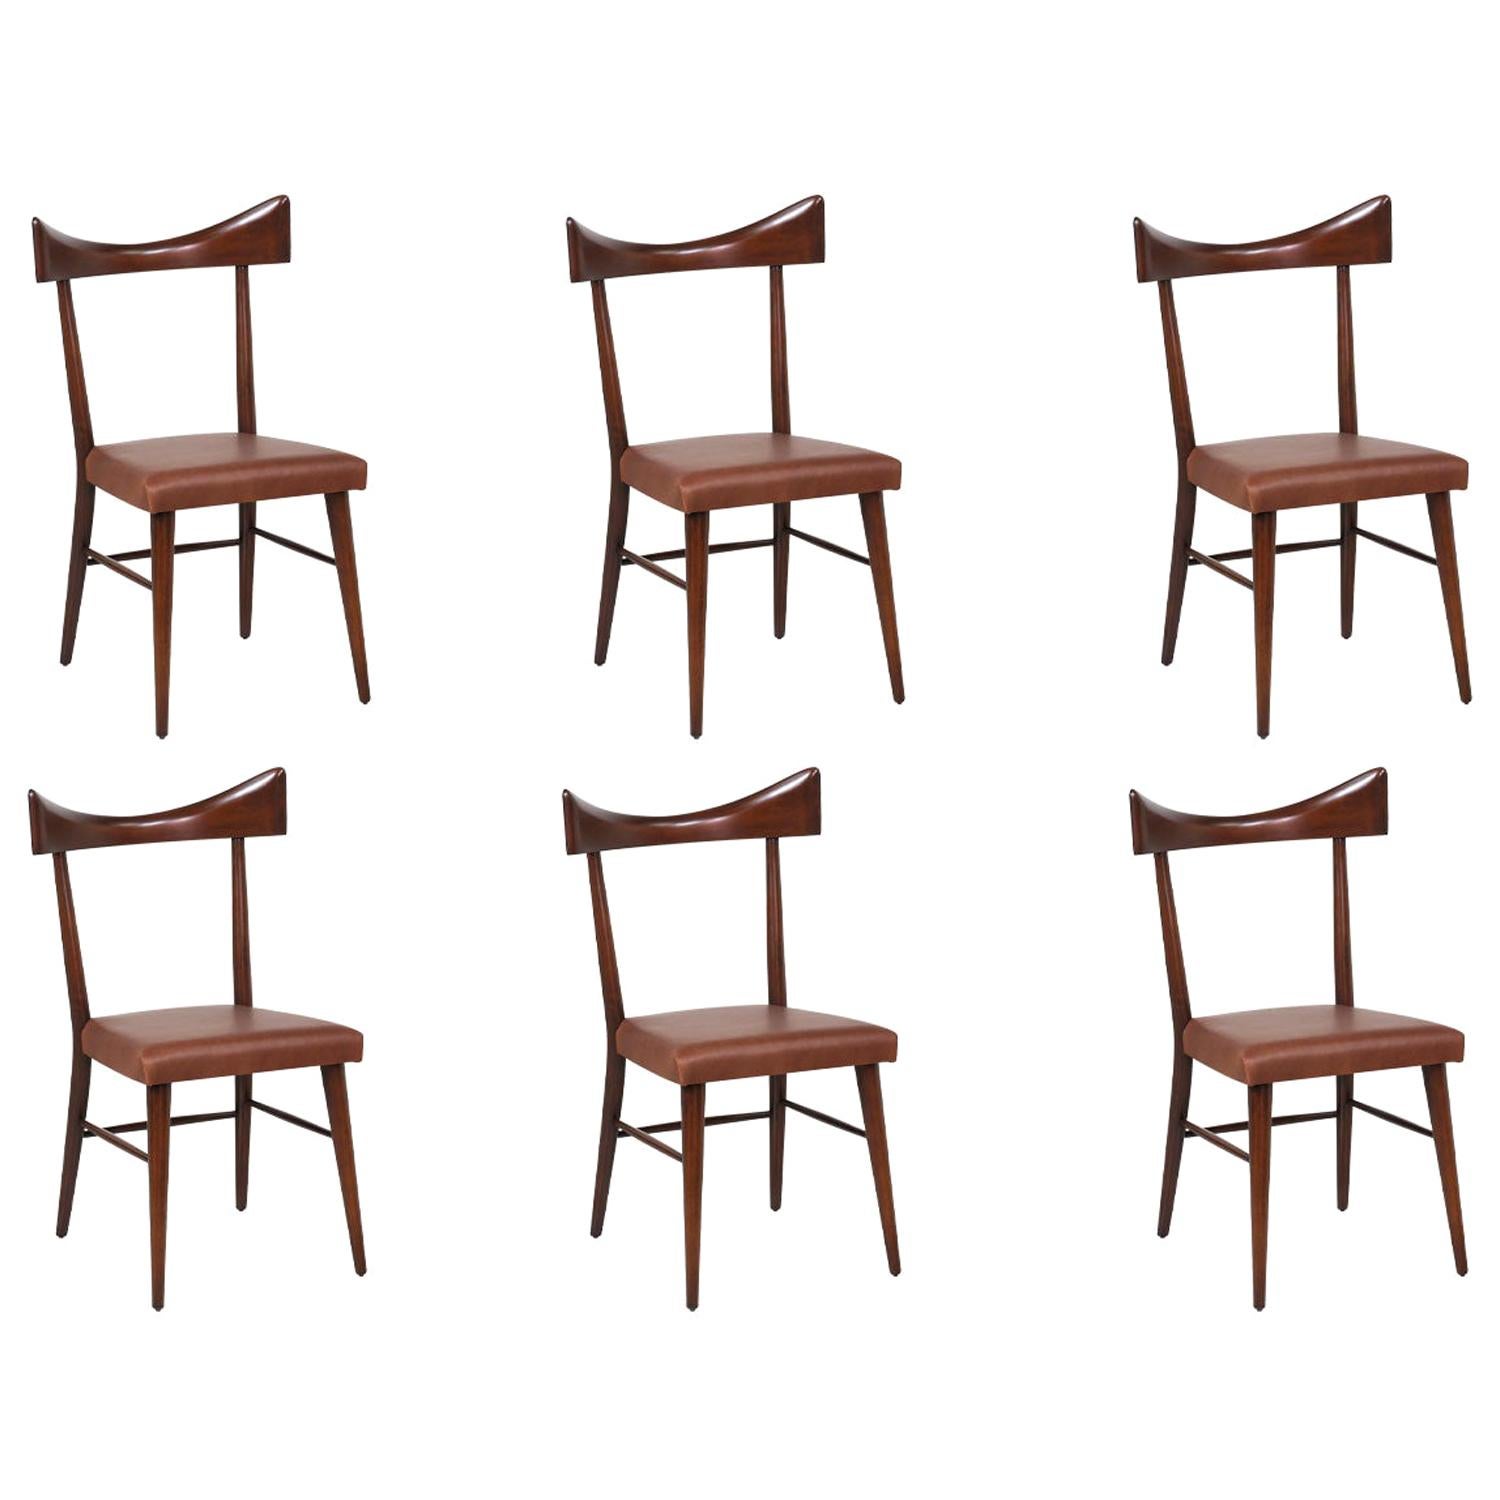 Expertly Restored - Paul McCobb "Bowtie" Dining Chairs for Winchendon Furniture